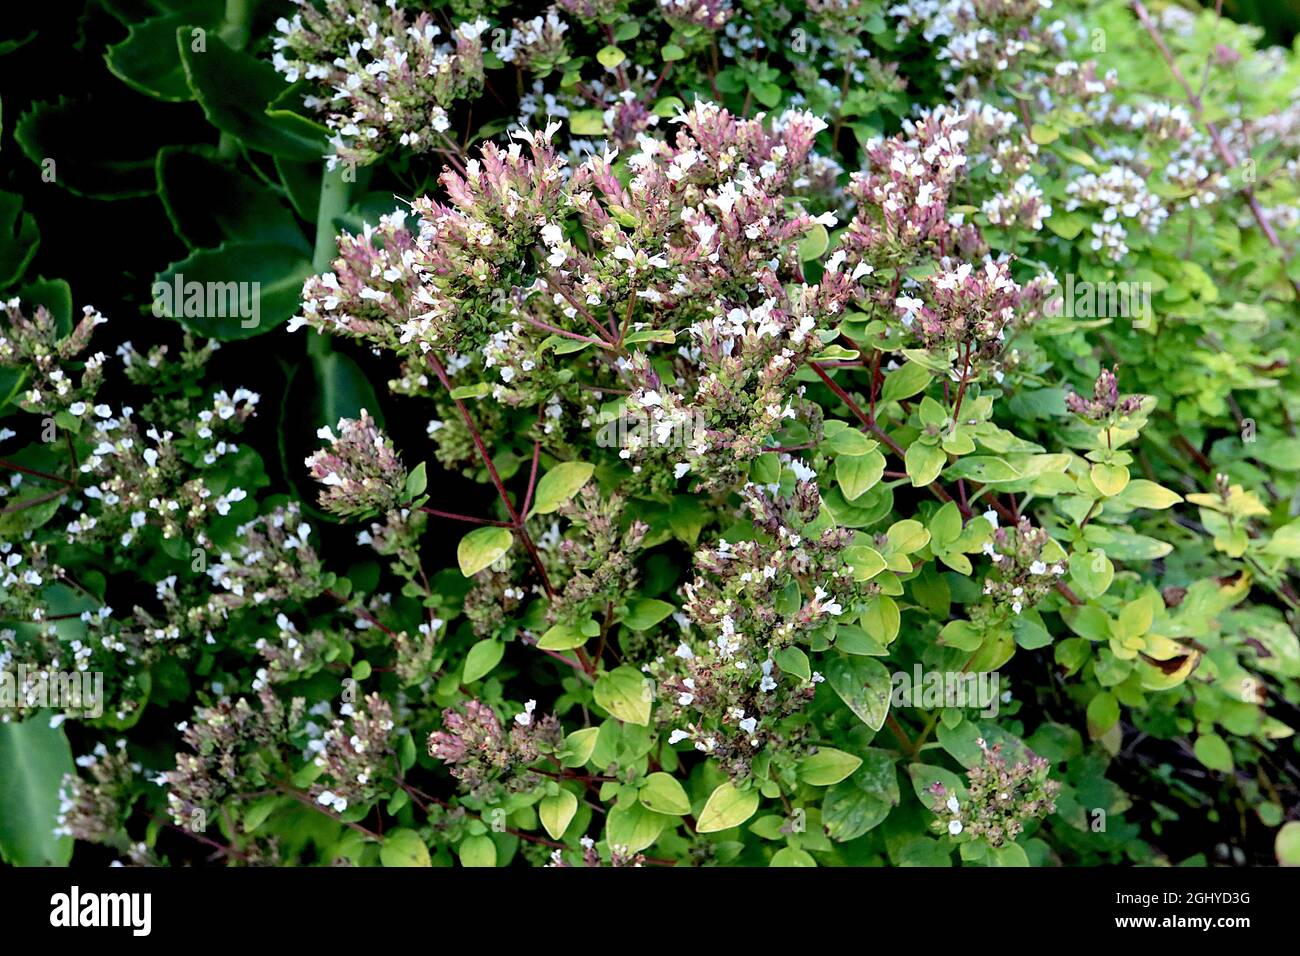 Origanum majorana marjoram – dense domed clusters of tiny white flowers and small ovate aromatic leaves,  August, England, UK Stock Photo